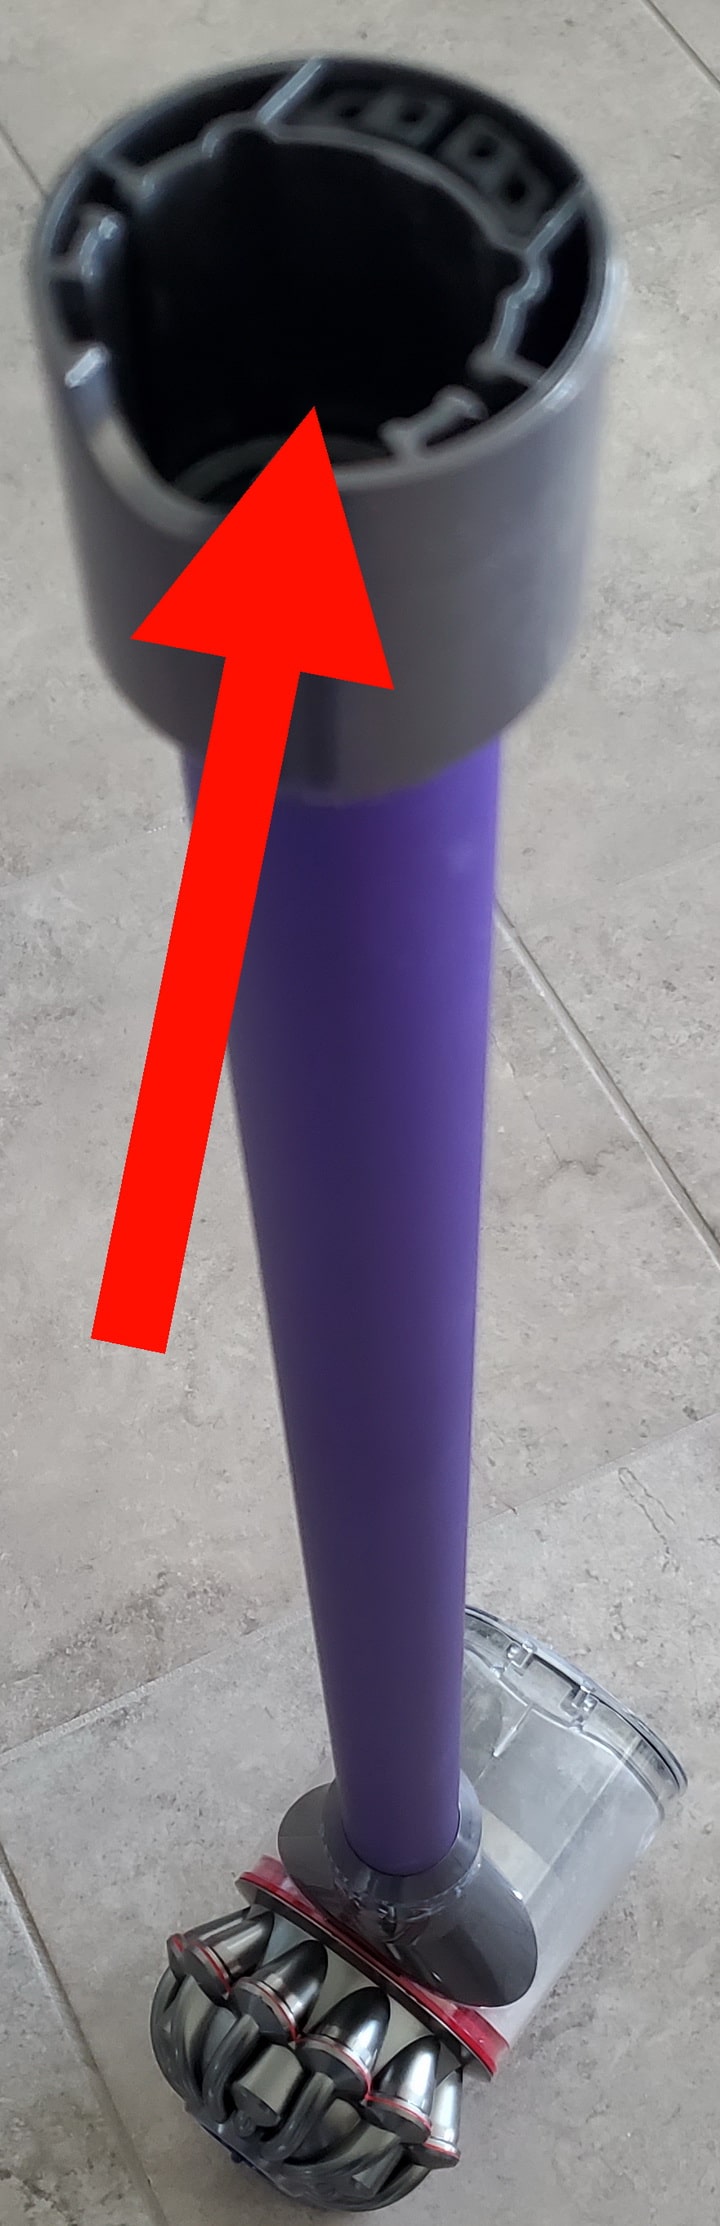 Dyson Vac - The tube that connects the motor to the brush bar may be clogged